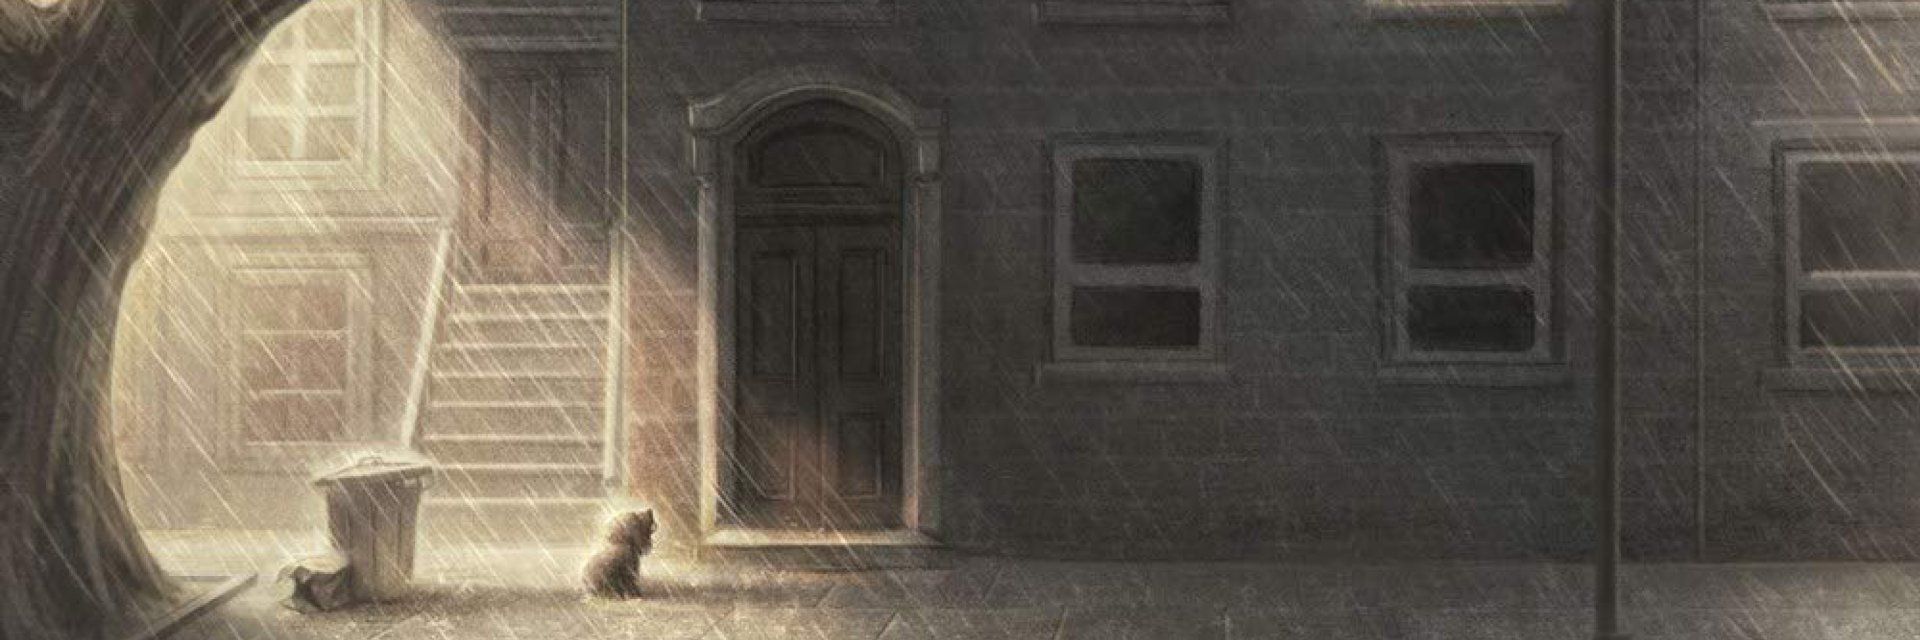 Illustration of a dog sitting outside a building in the rain